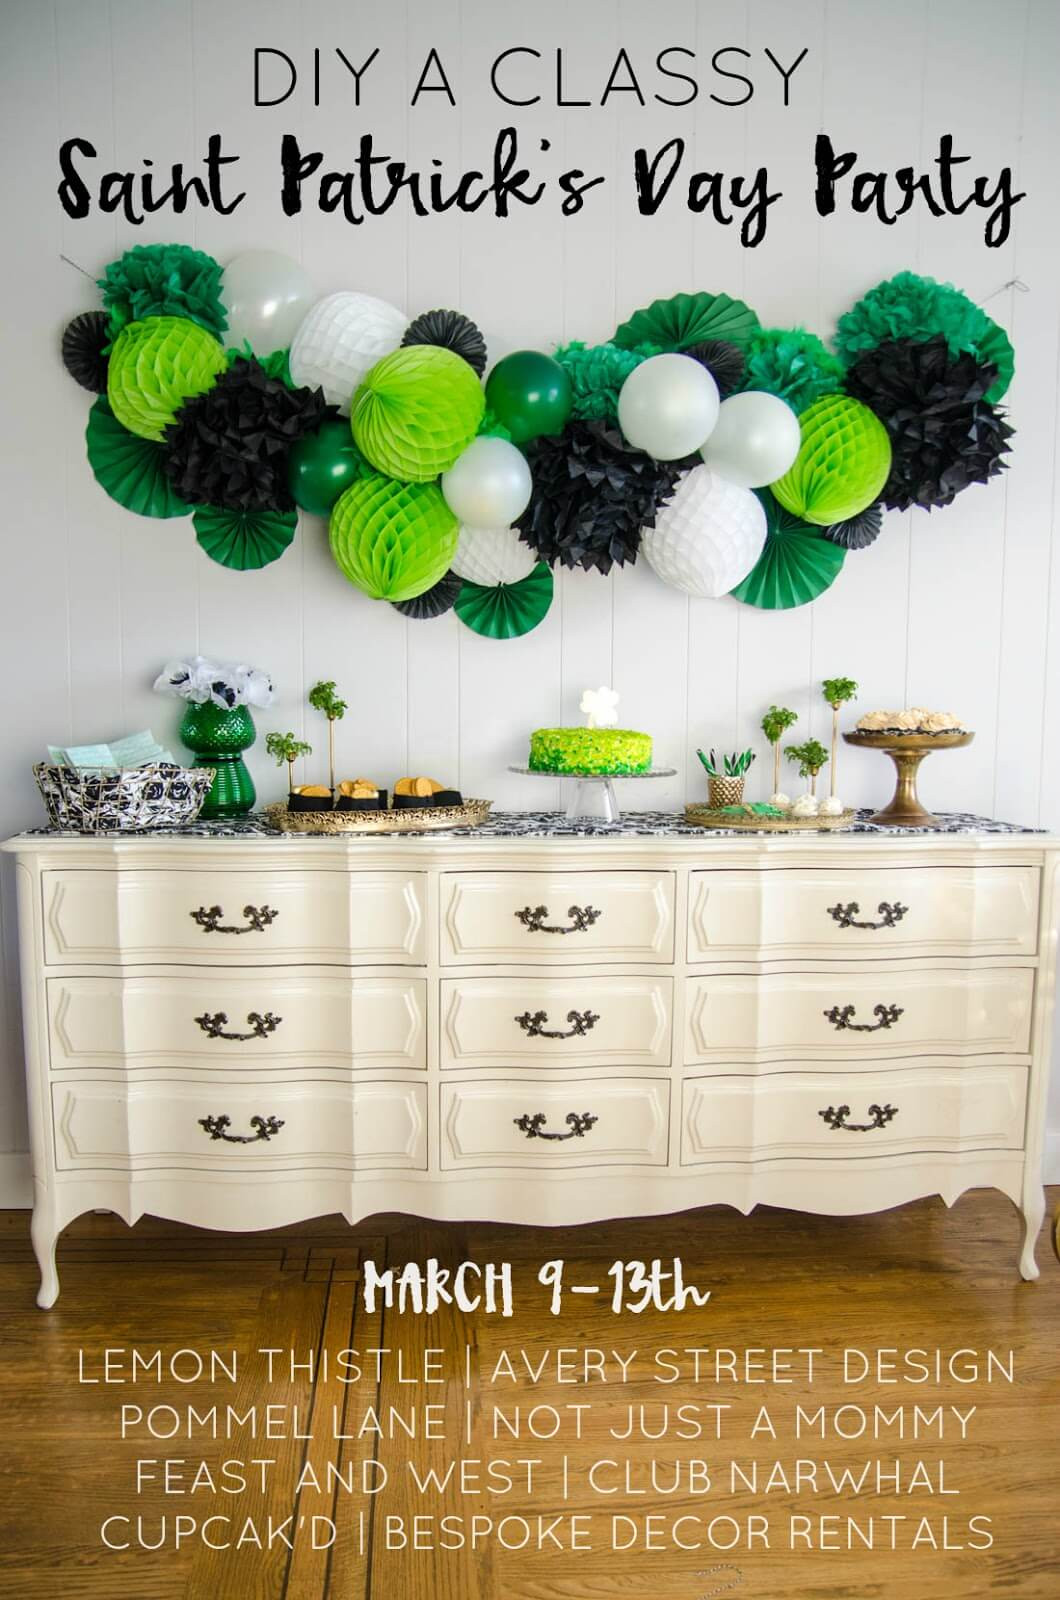 St Patrick Day Party Ideas For Adults
 25 Best DIY St Patrick s Day Decorations and Ideas for 2020